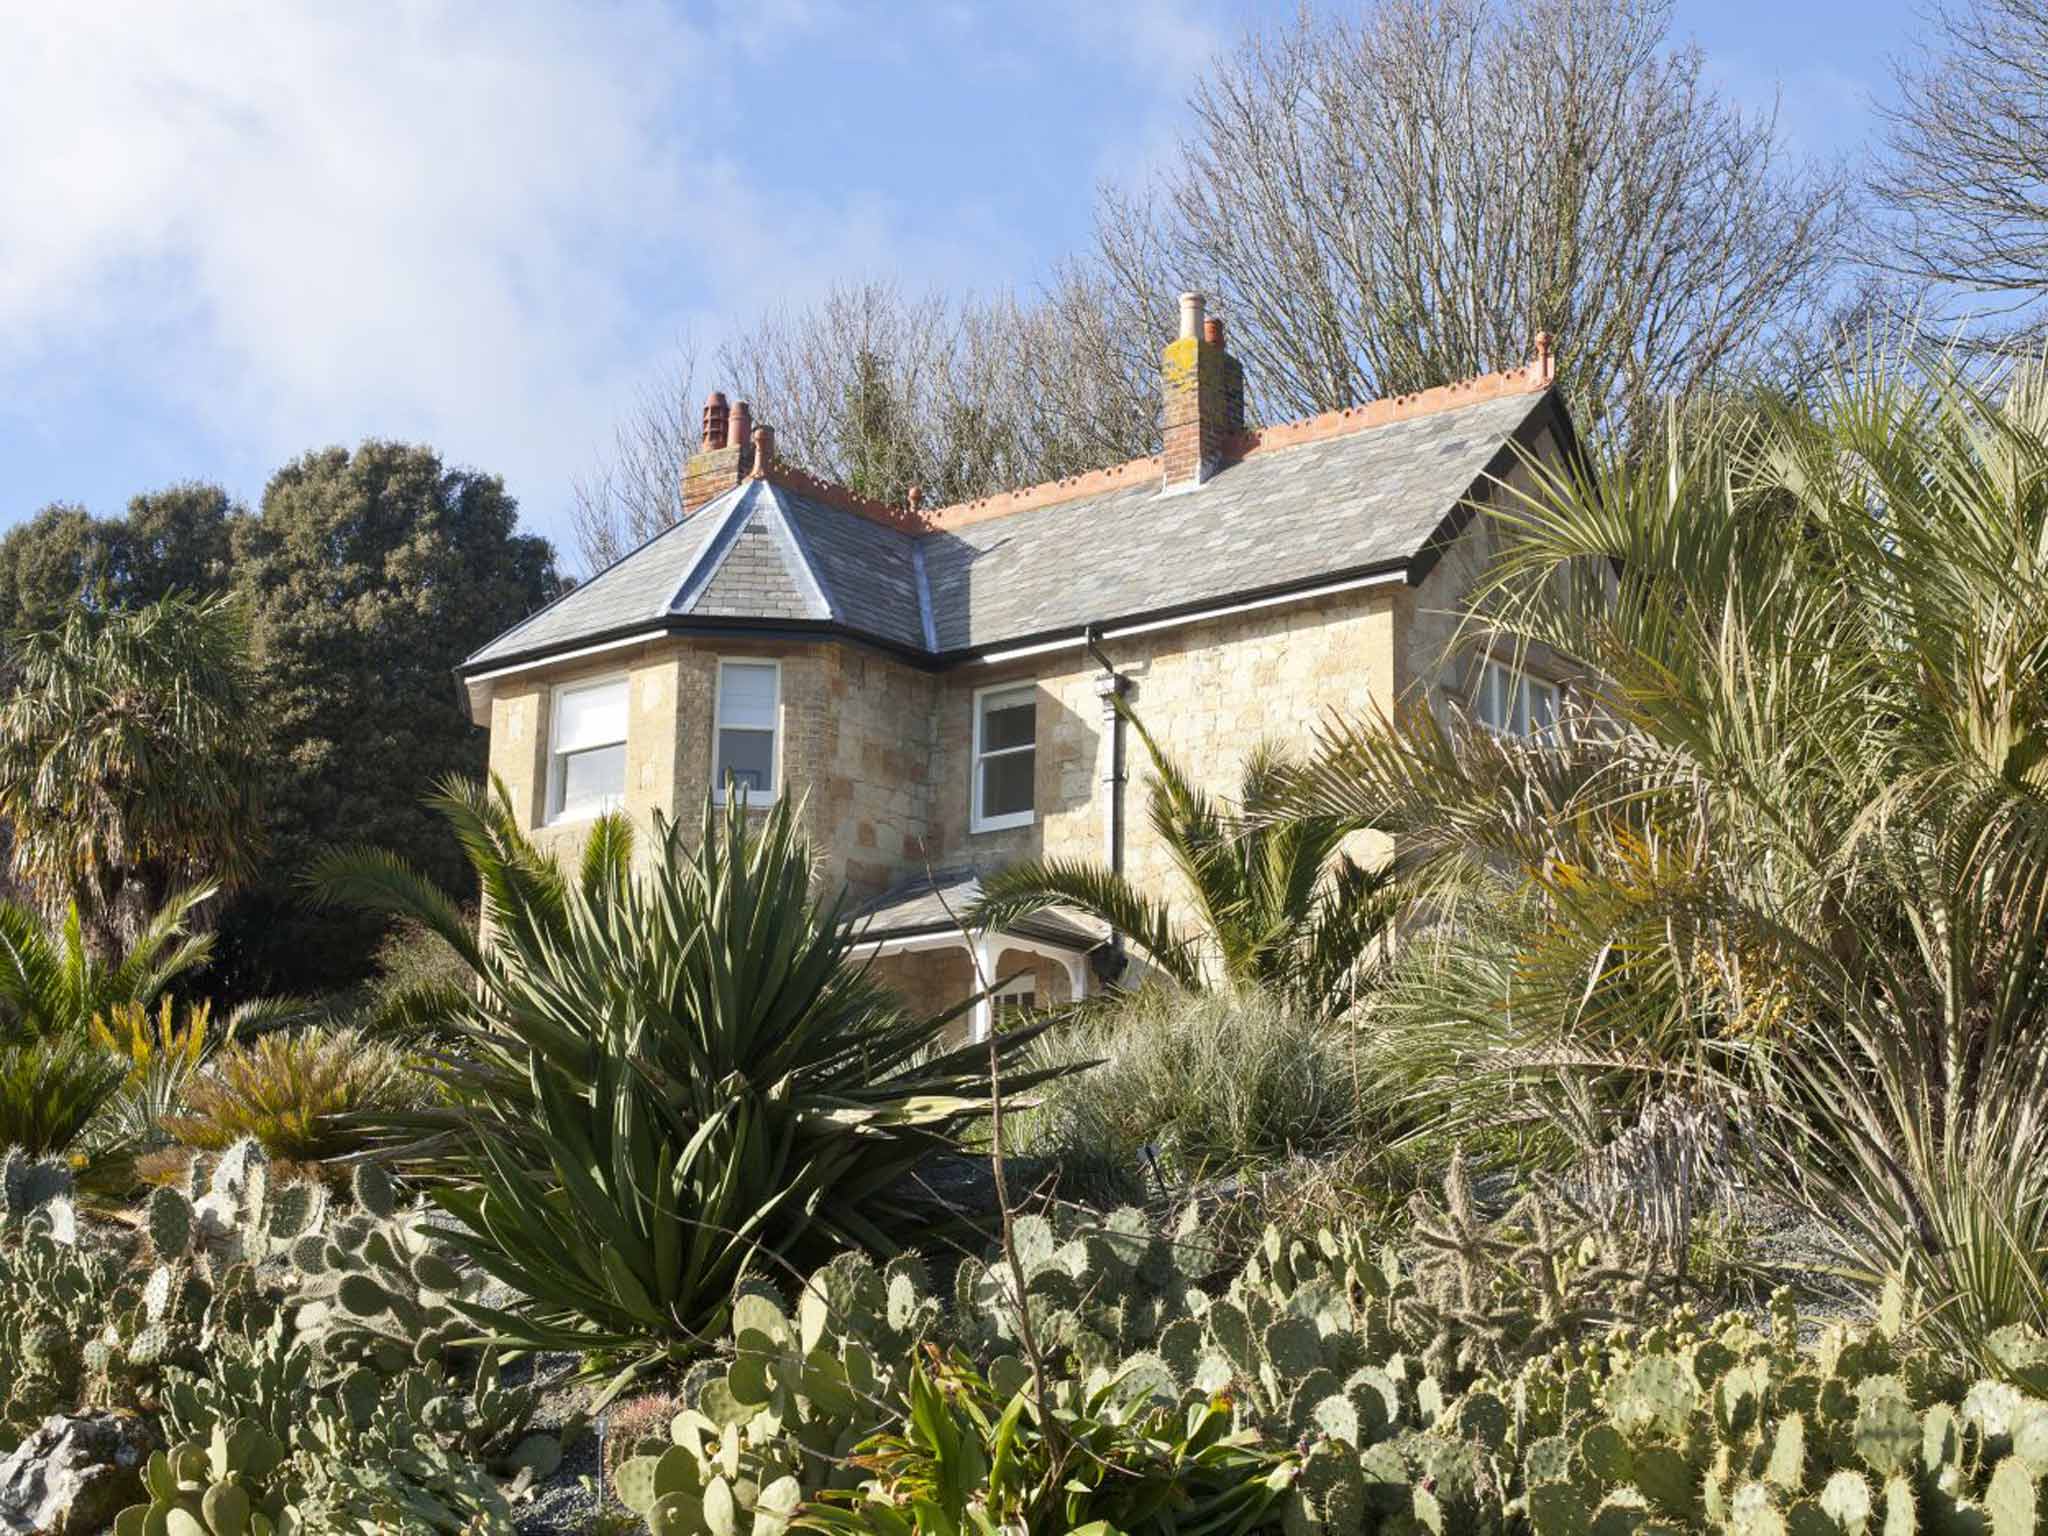 Gardening leave: Signal Point Cottage sits in the Arid Garden